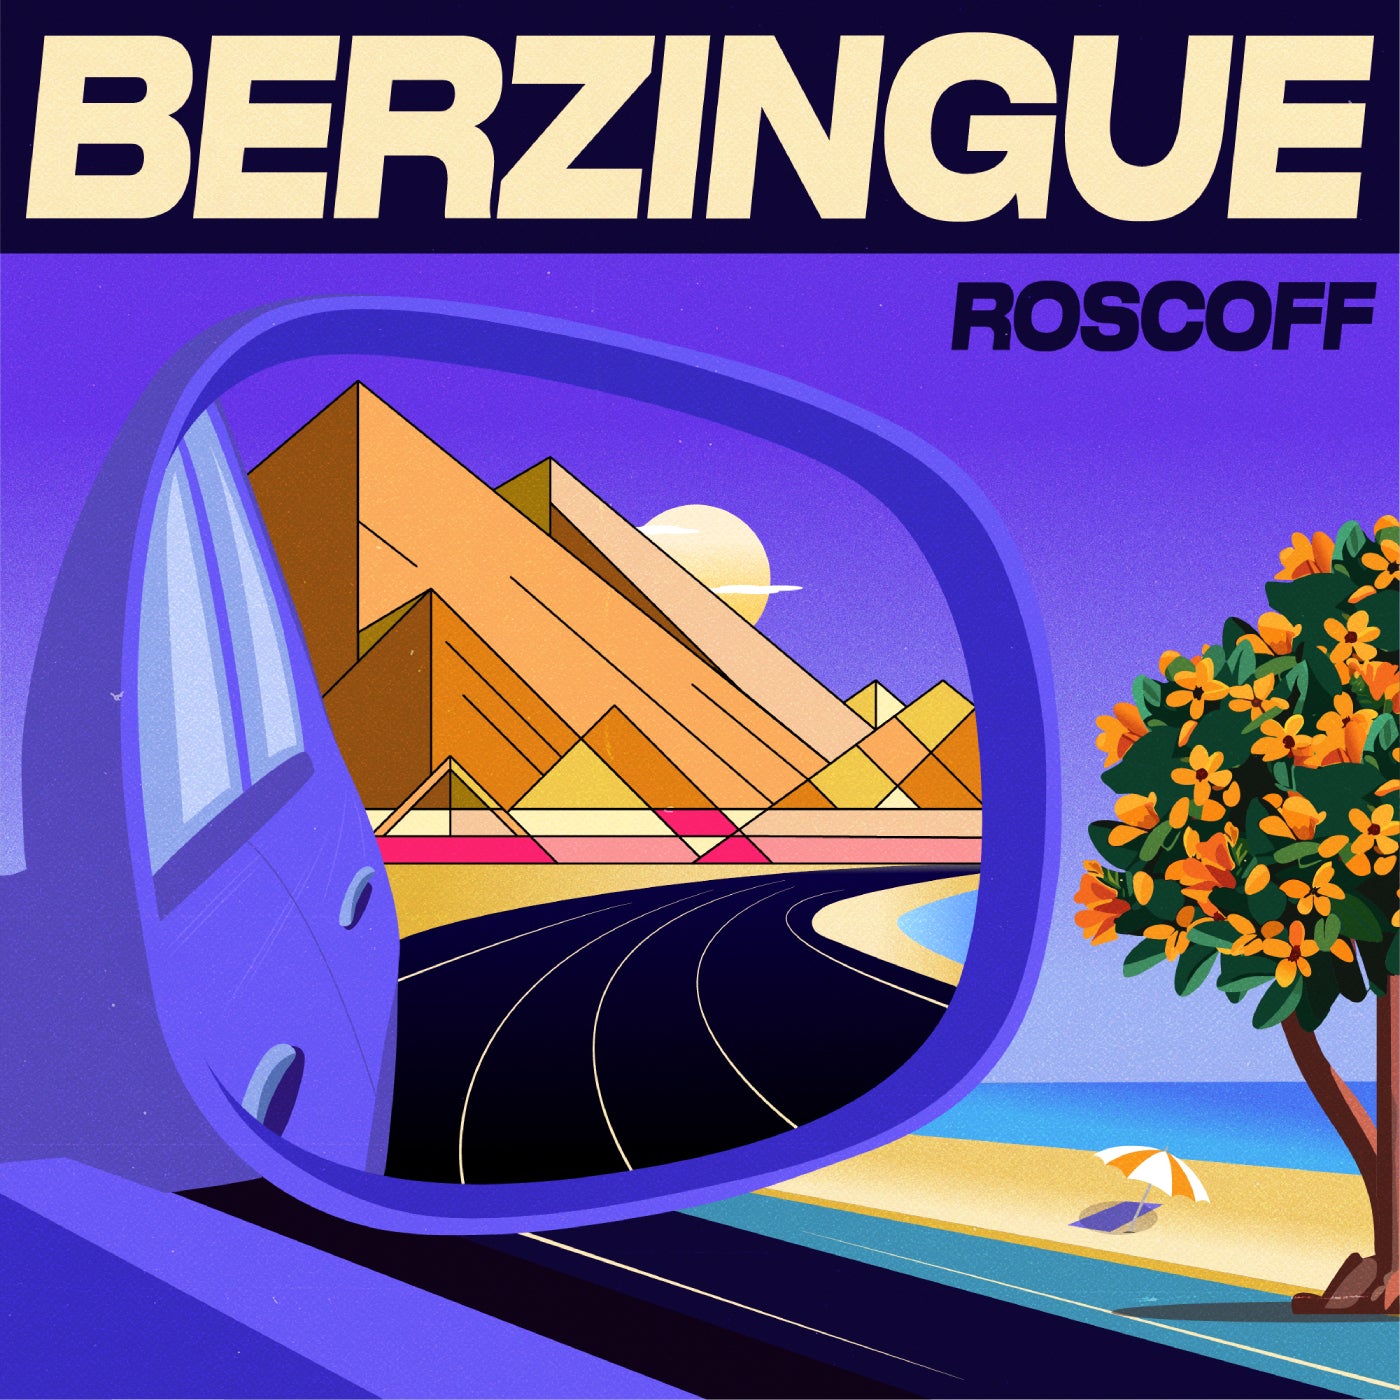 Release Cover: Roscoff Download Free on Electrobuzz